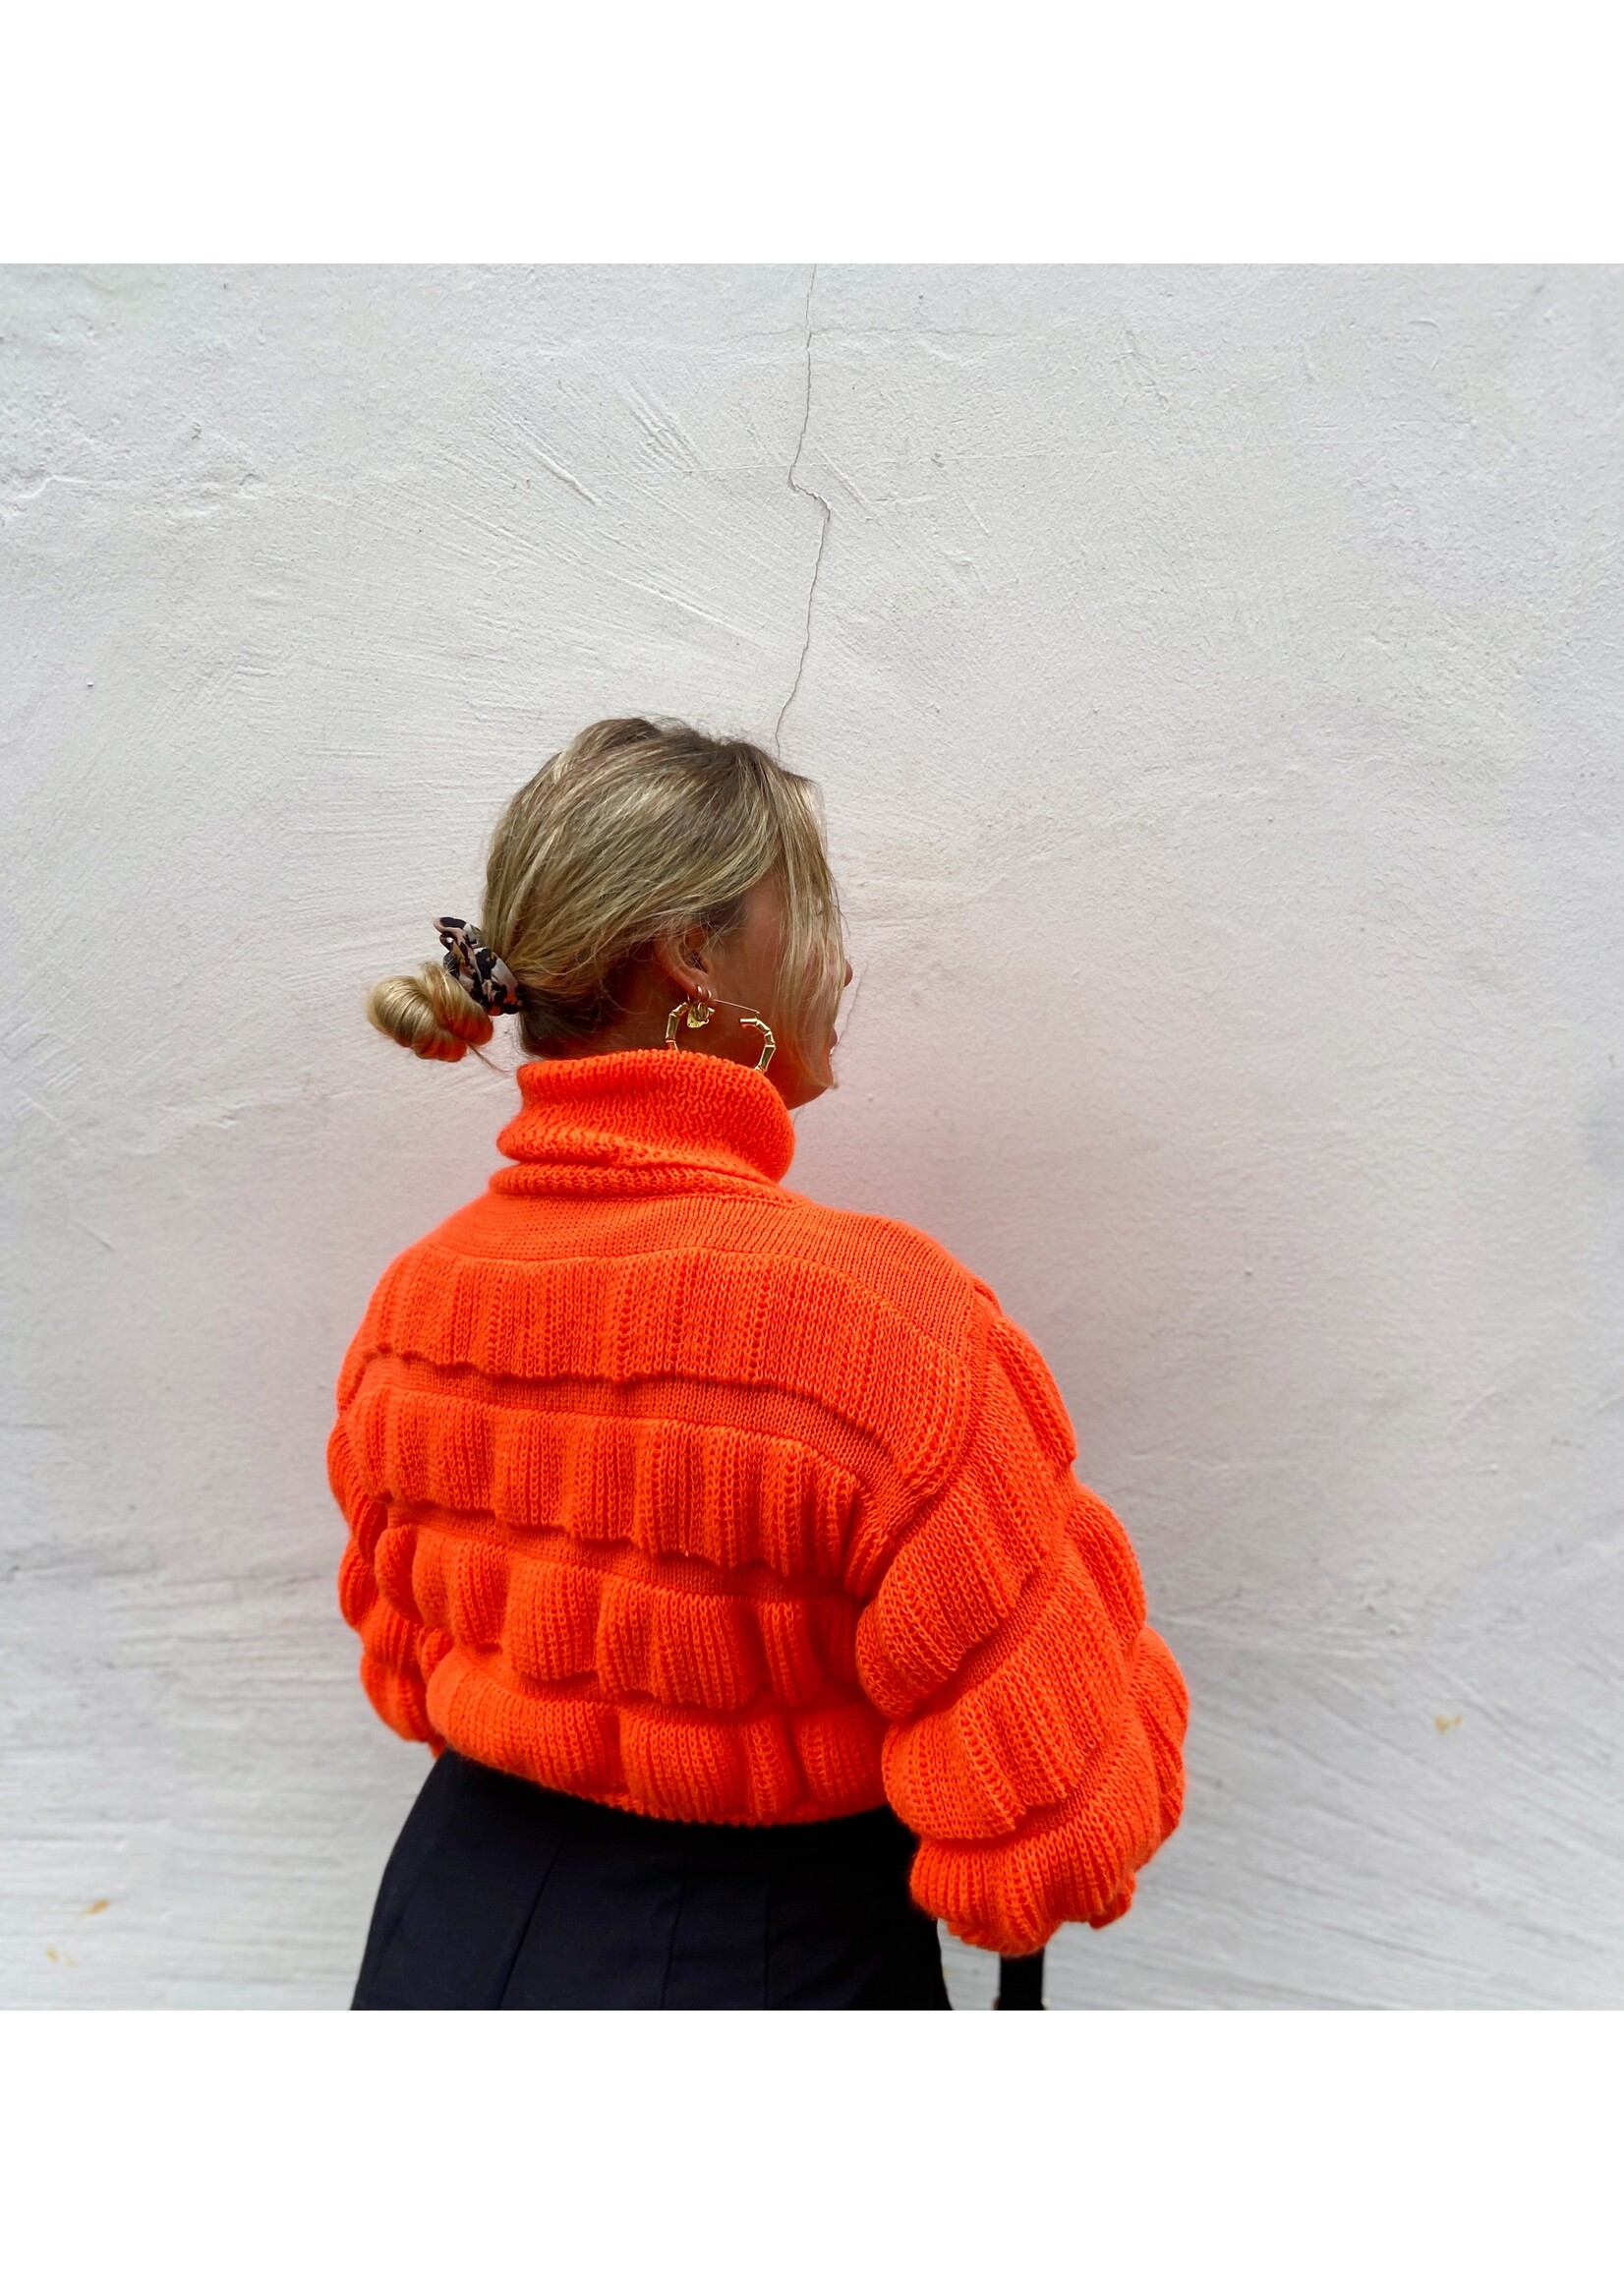 YOU ARE SPECIAL "Mila" Neon Orange Cropped Sweater